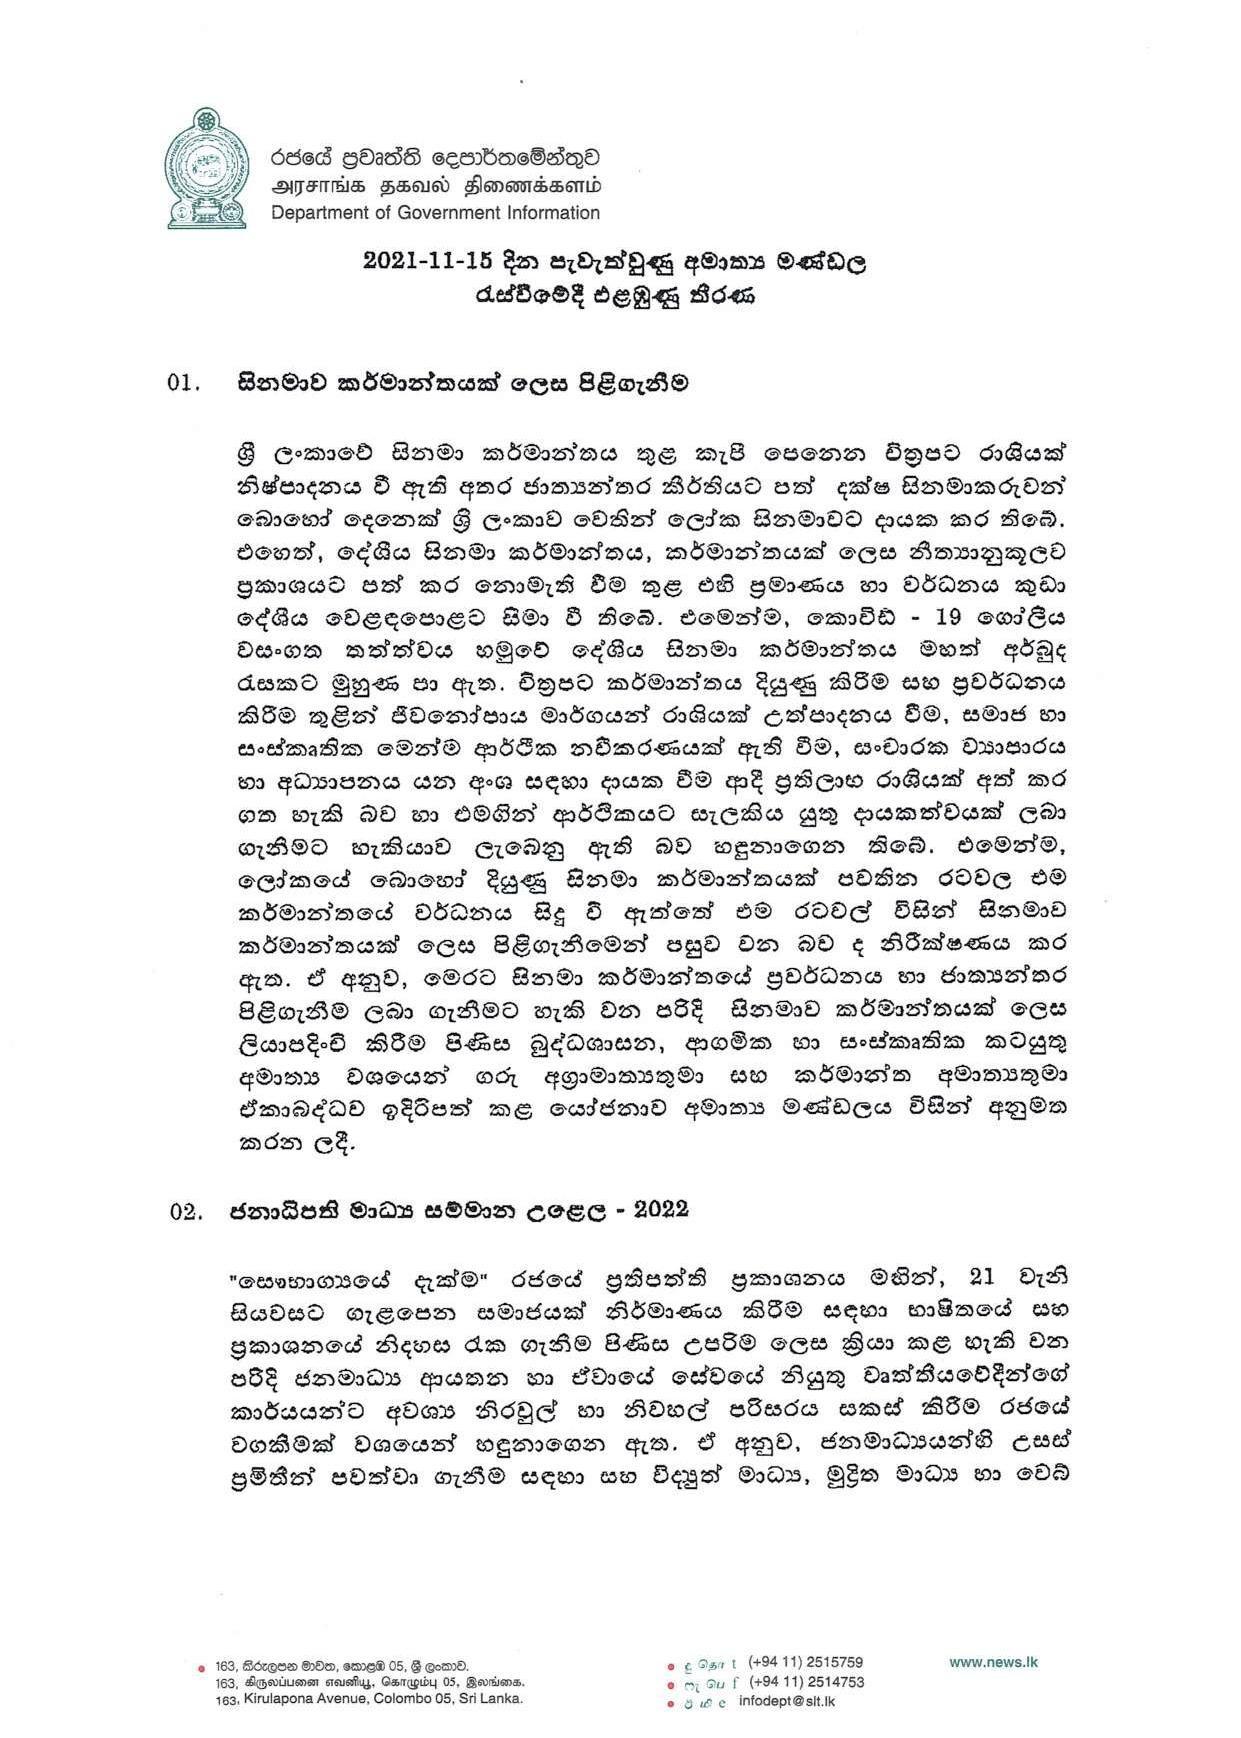 Cabinet Decision on 15.11.2021 compressed page 001